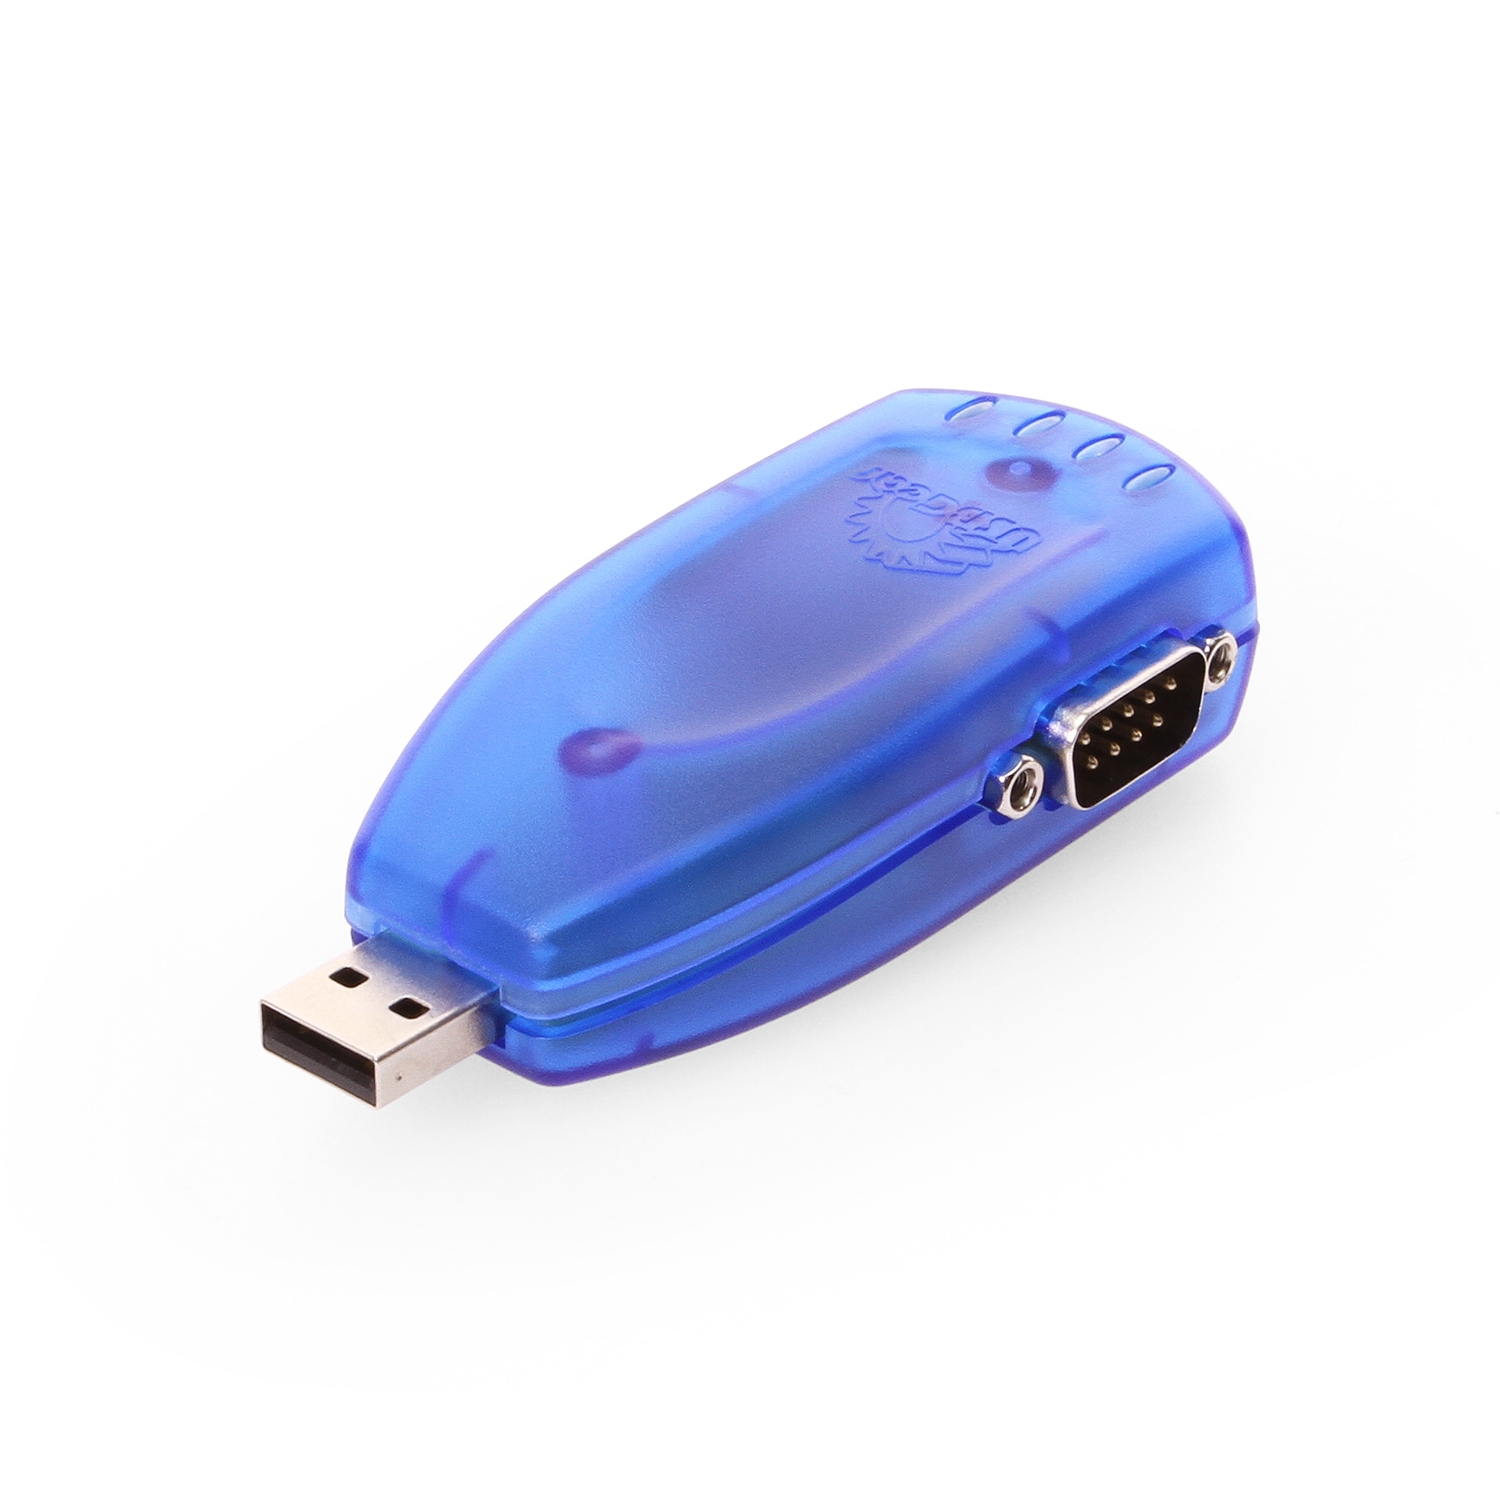 Impresionante solicitud Armstrong Dual Port DB-9 USB Serial Ultra MINI Adapter with Cable RS-232 X 2